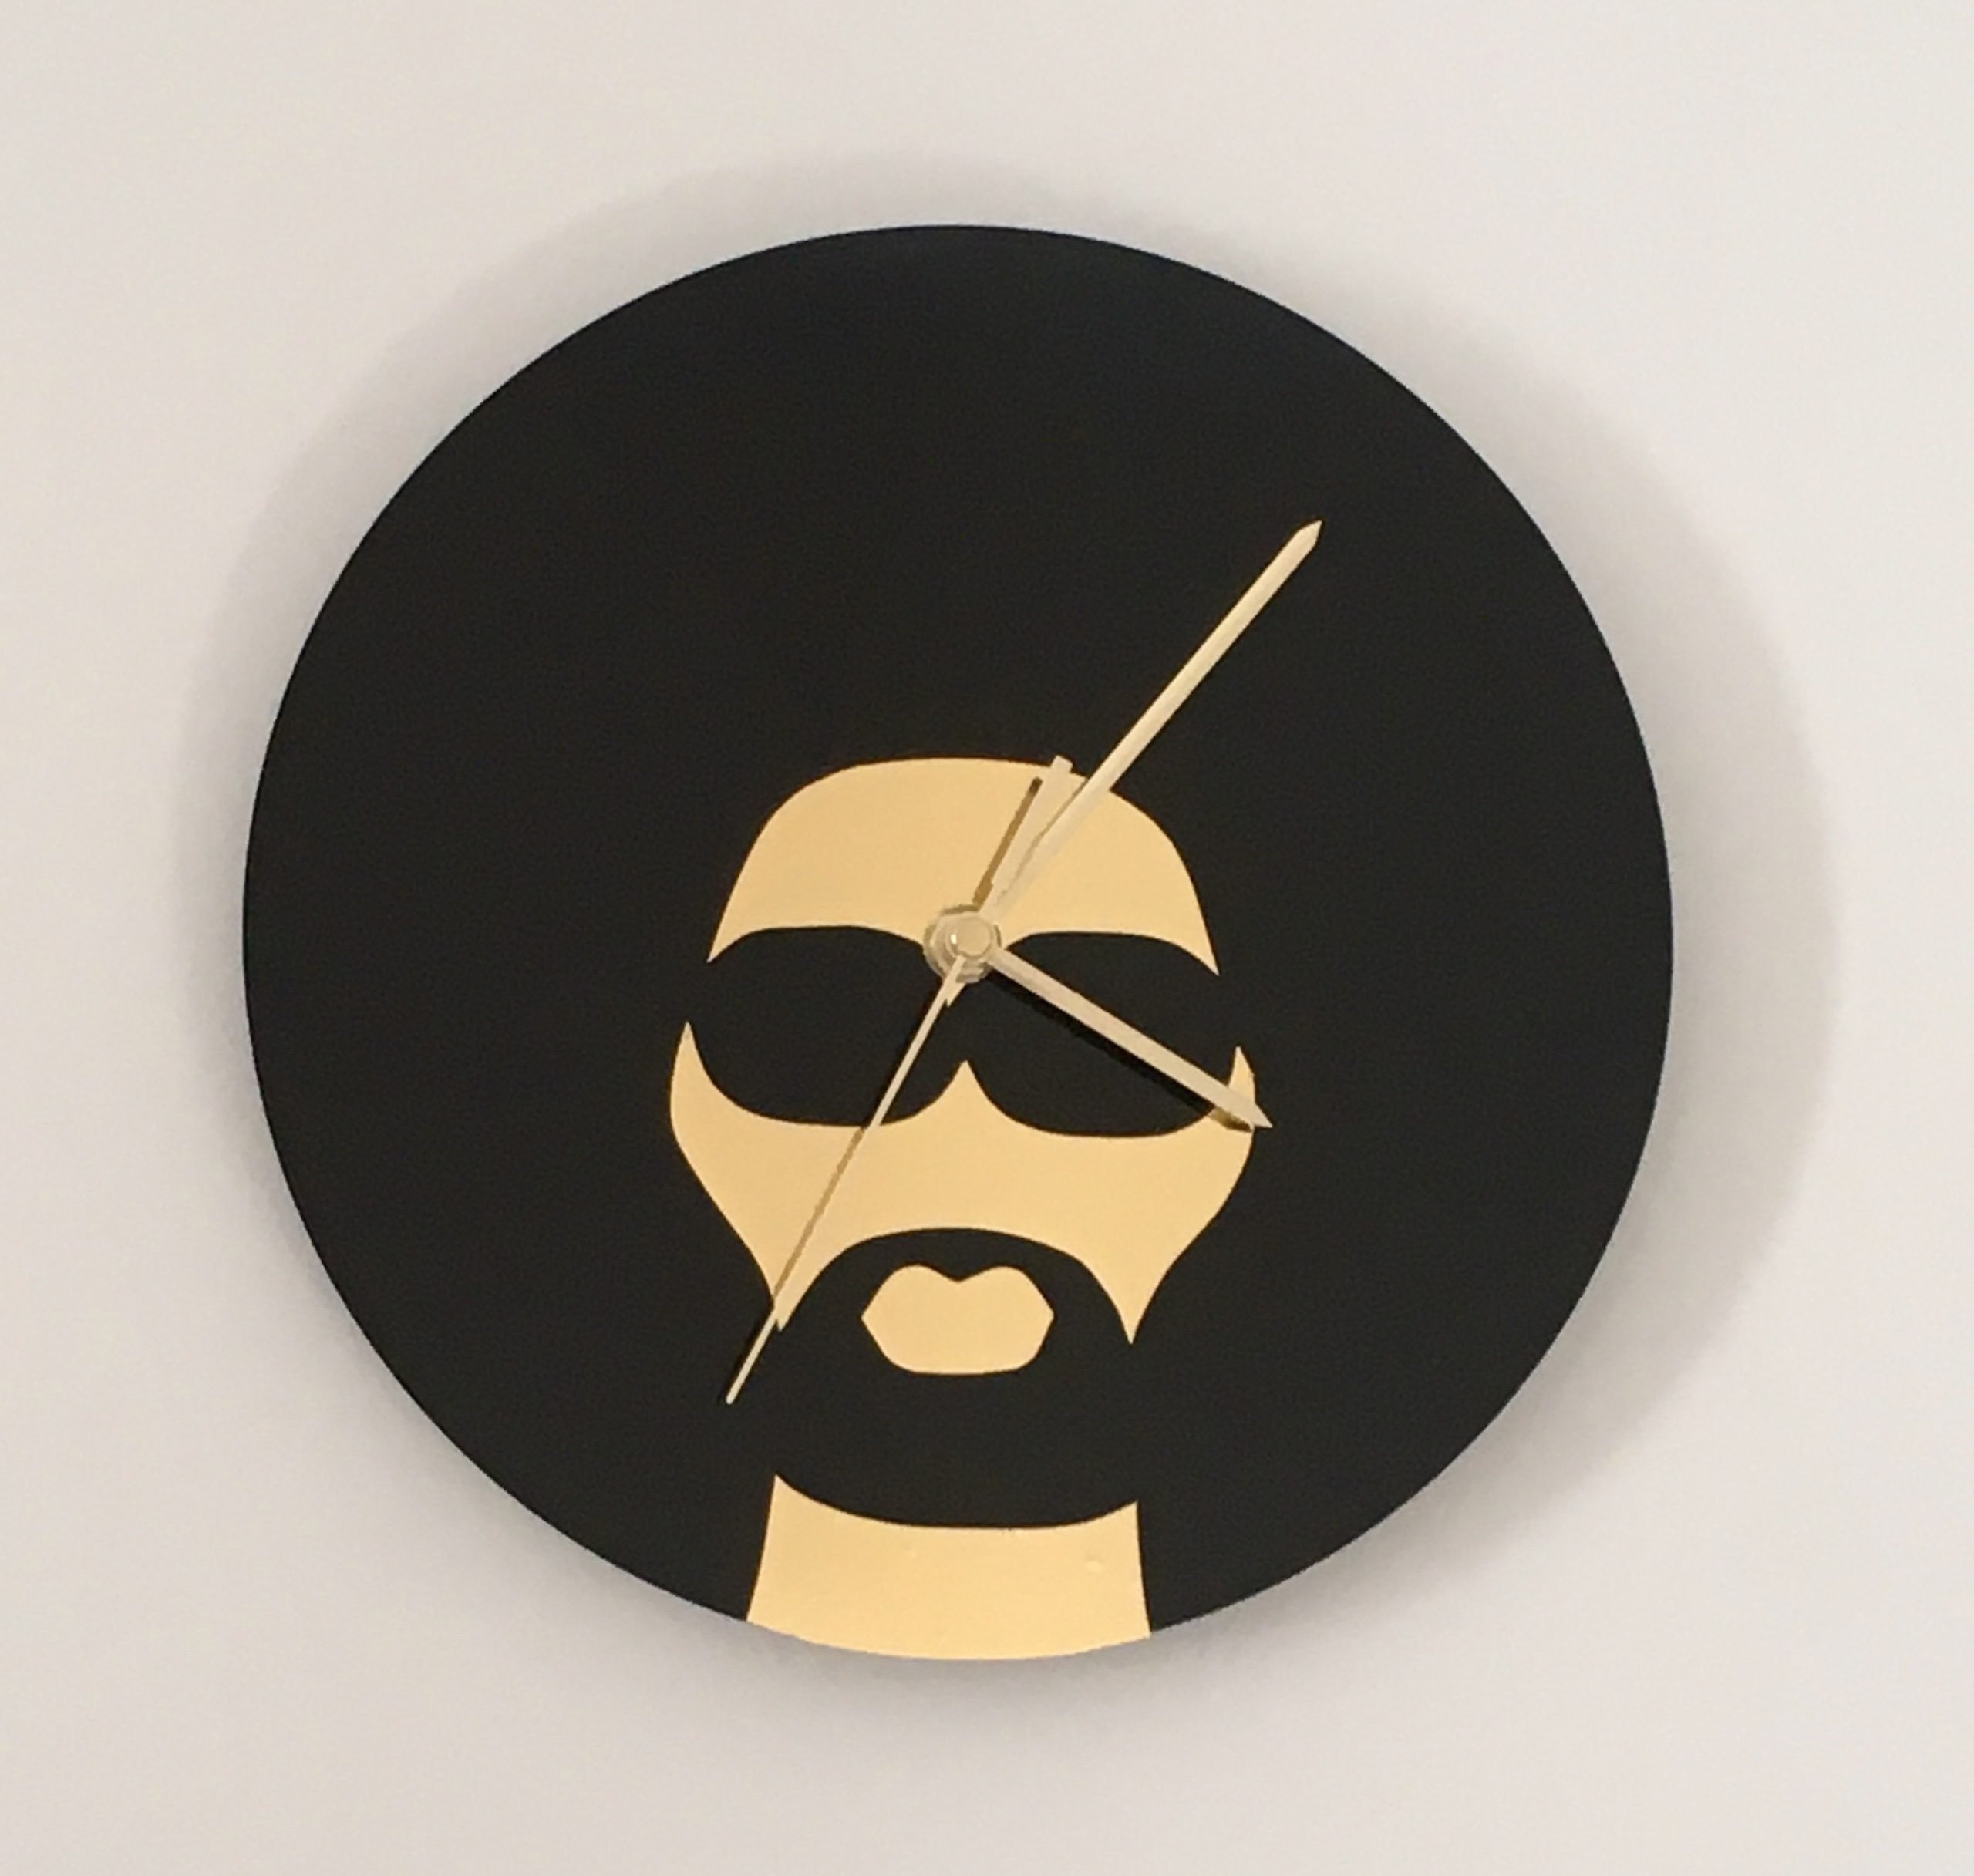 Afro Man Wall Clock – black and gold